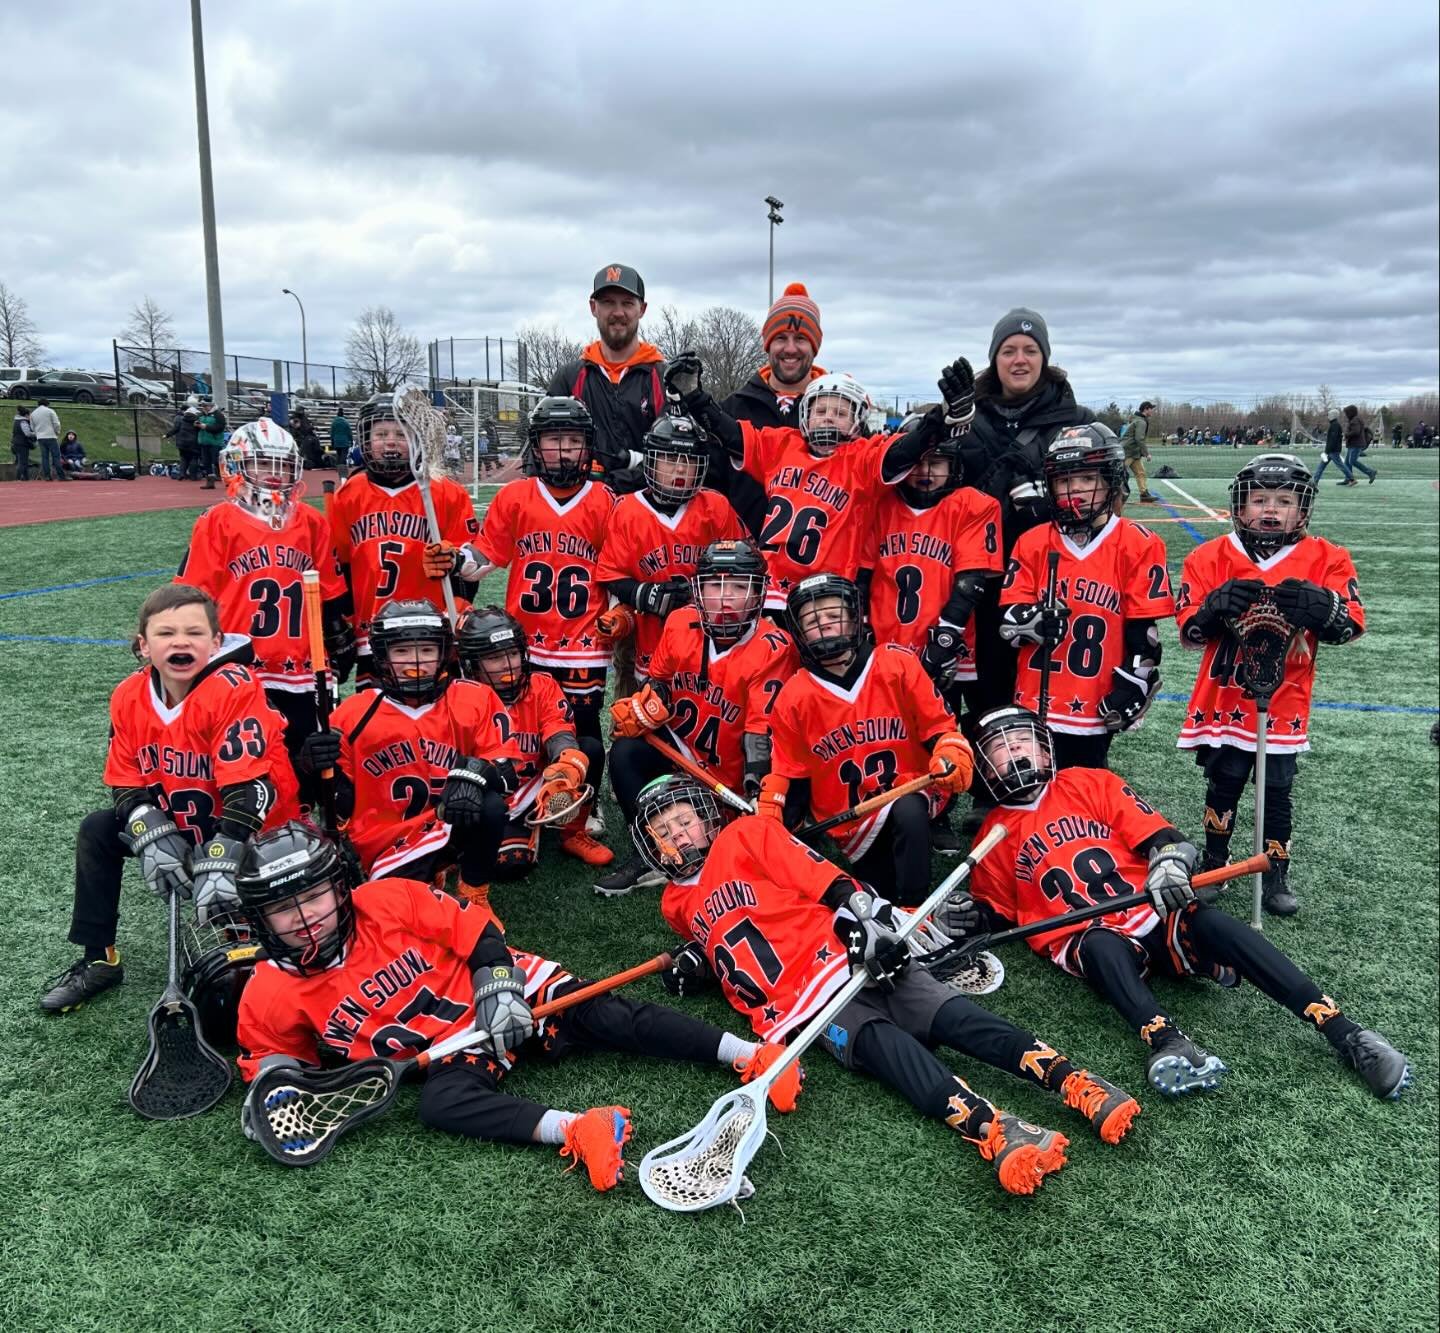 3 Big WINS for the OSML U9 Field team this weekend during the first weekend of OMFLL! 🥍